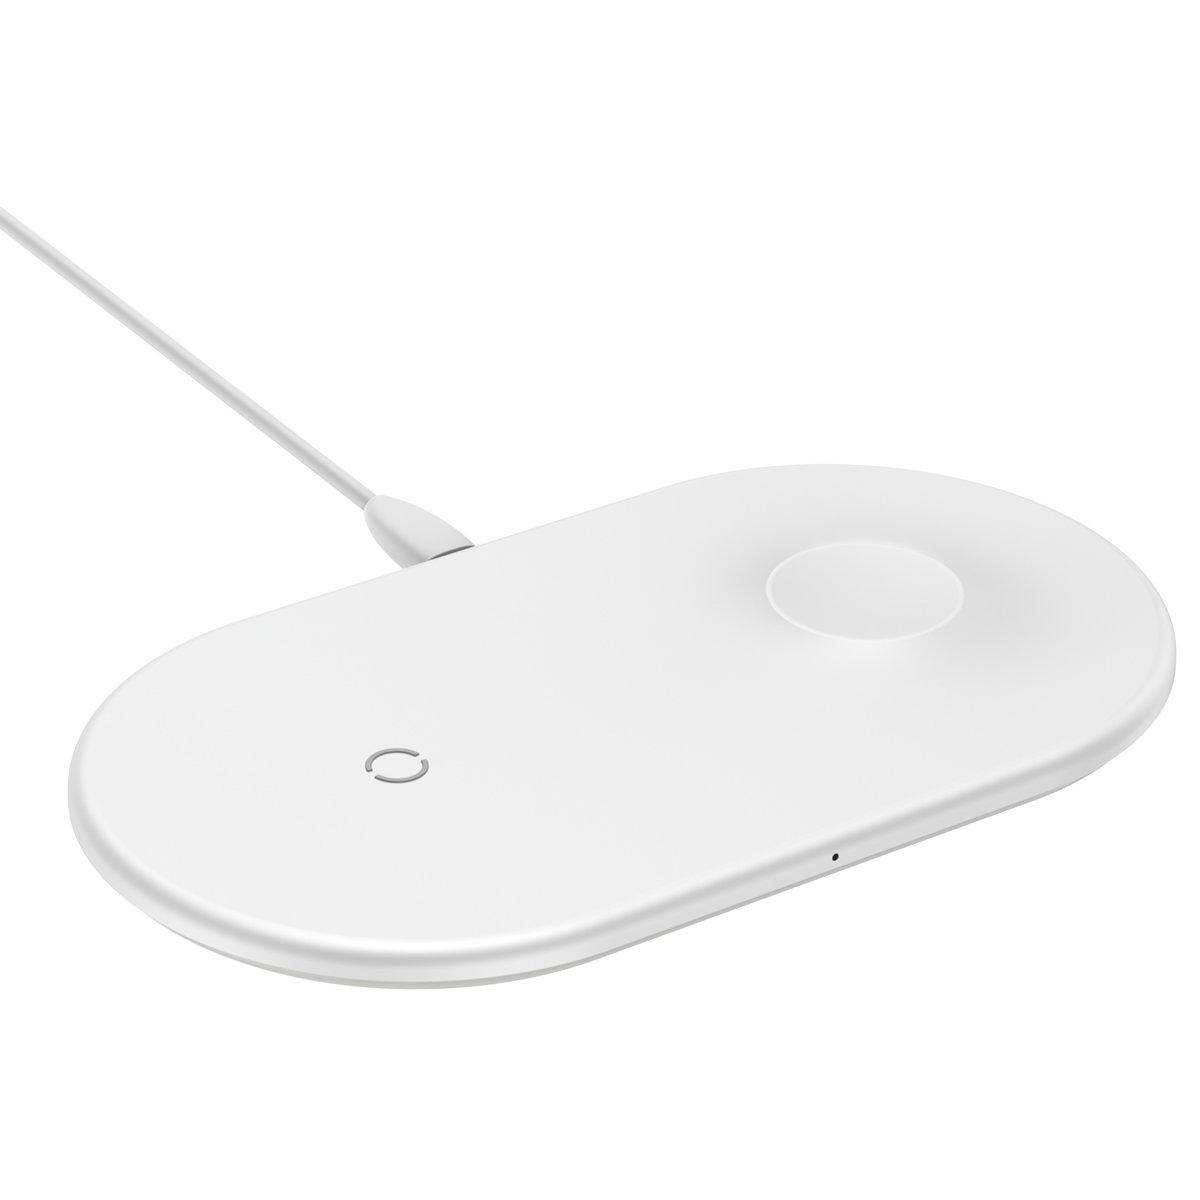 list item 4 of 11 Baseus 2-in-1 Wireless Charging Pad